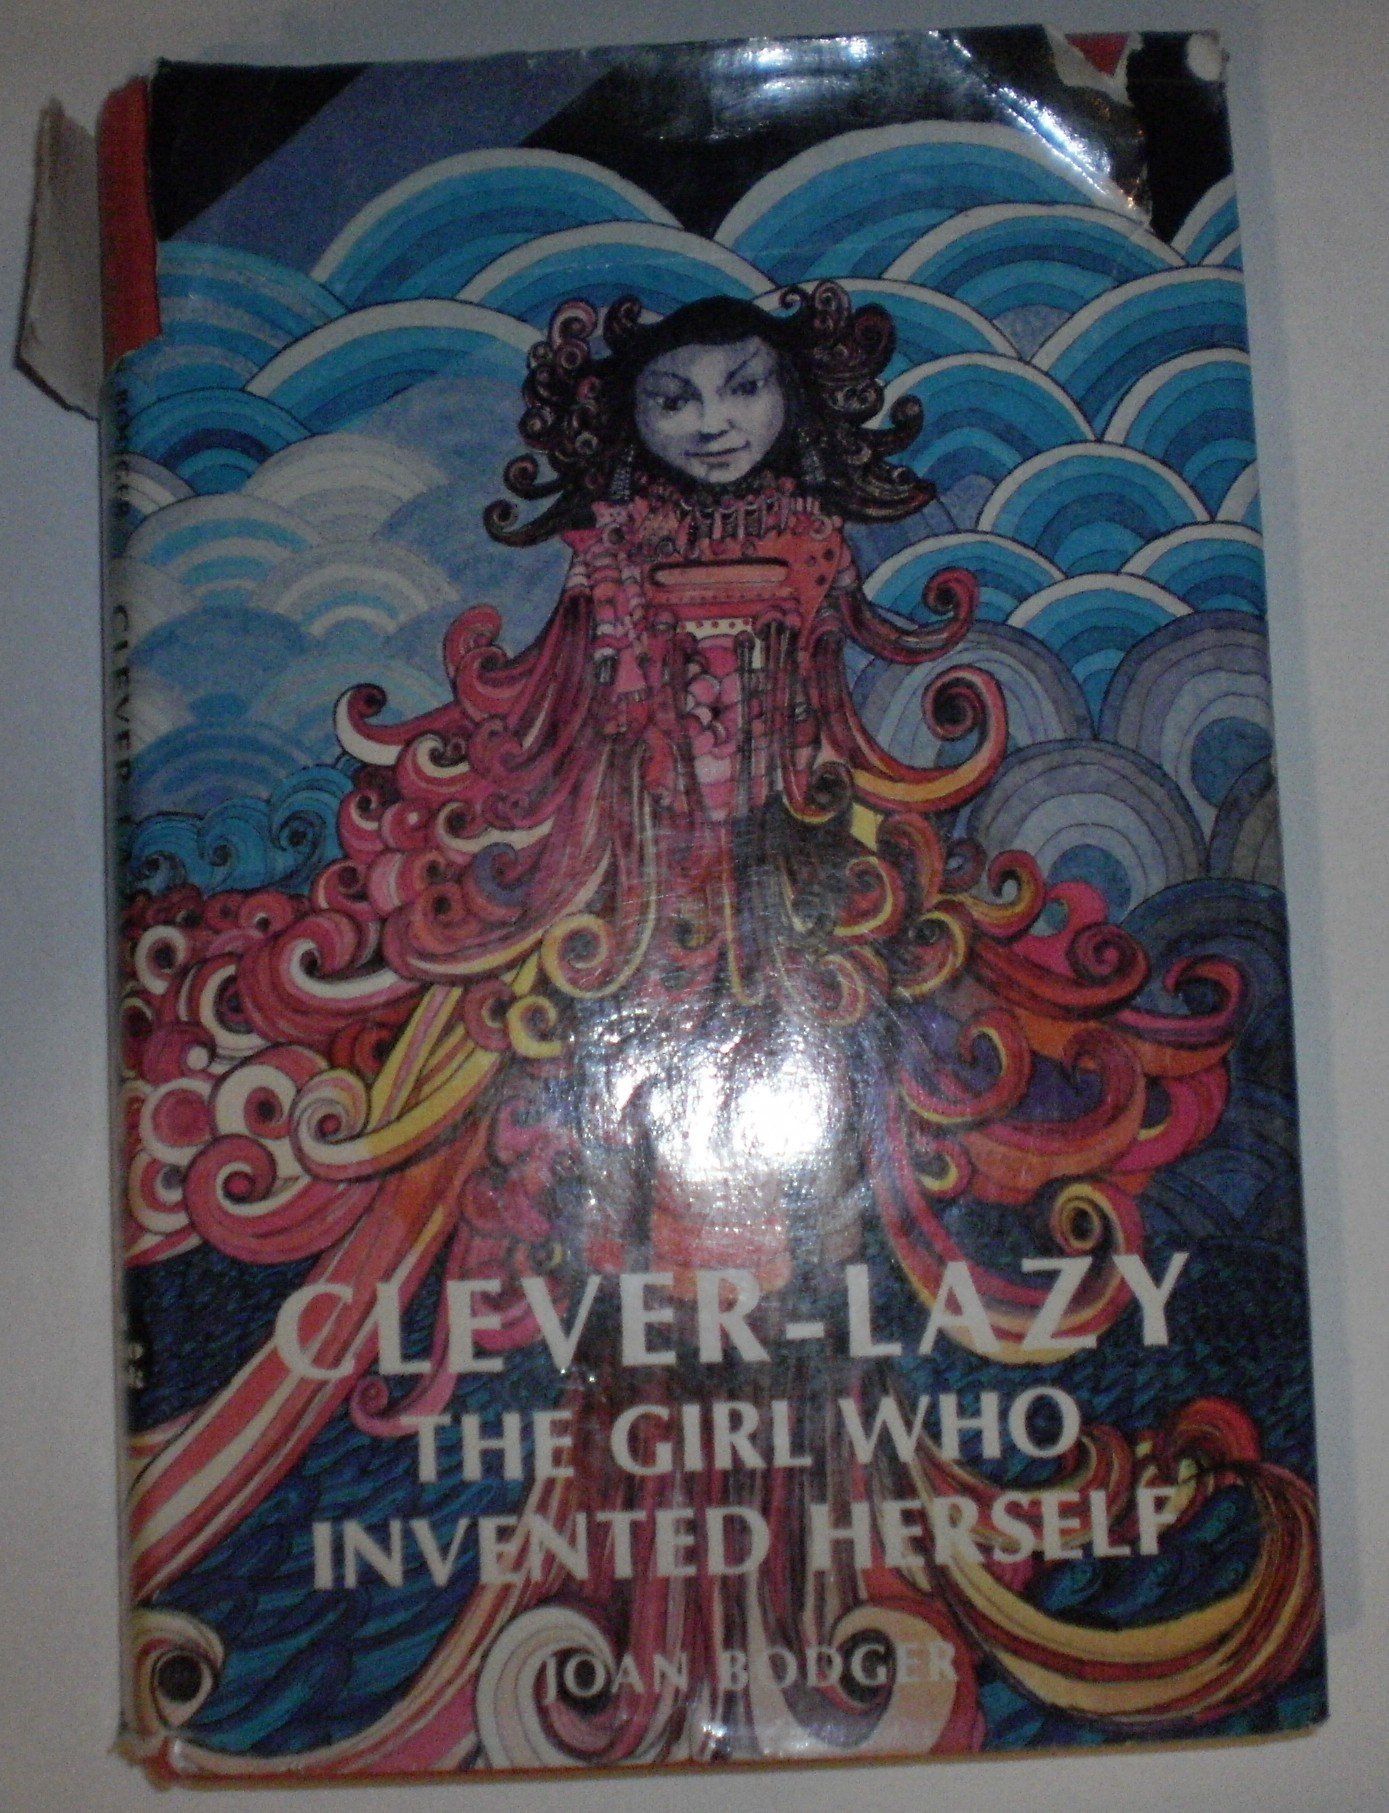 Clever-Lazy, the Girl Who Invented Herself